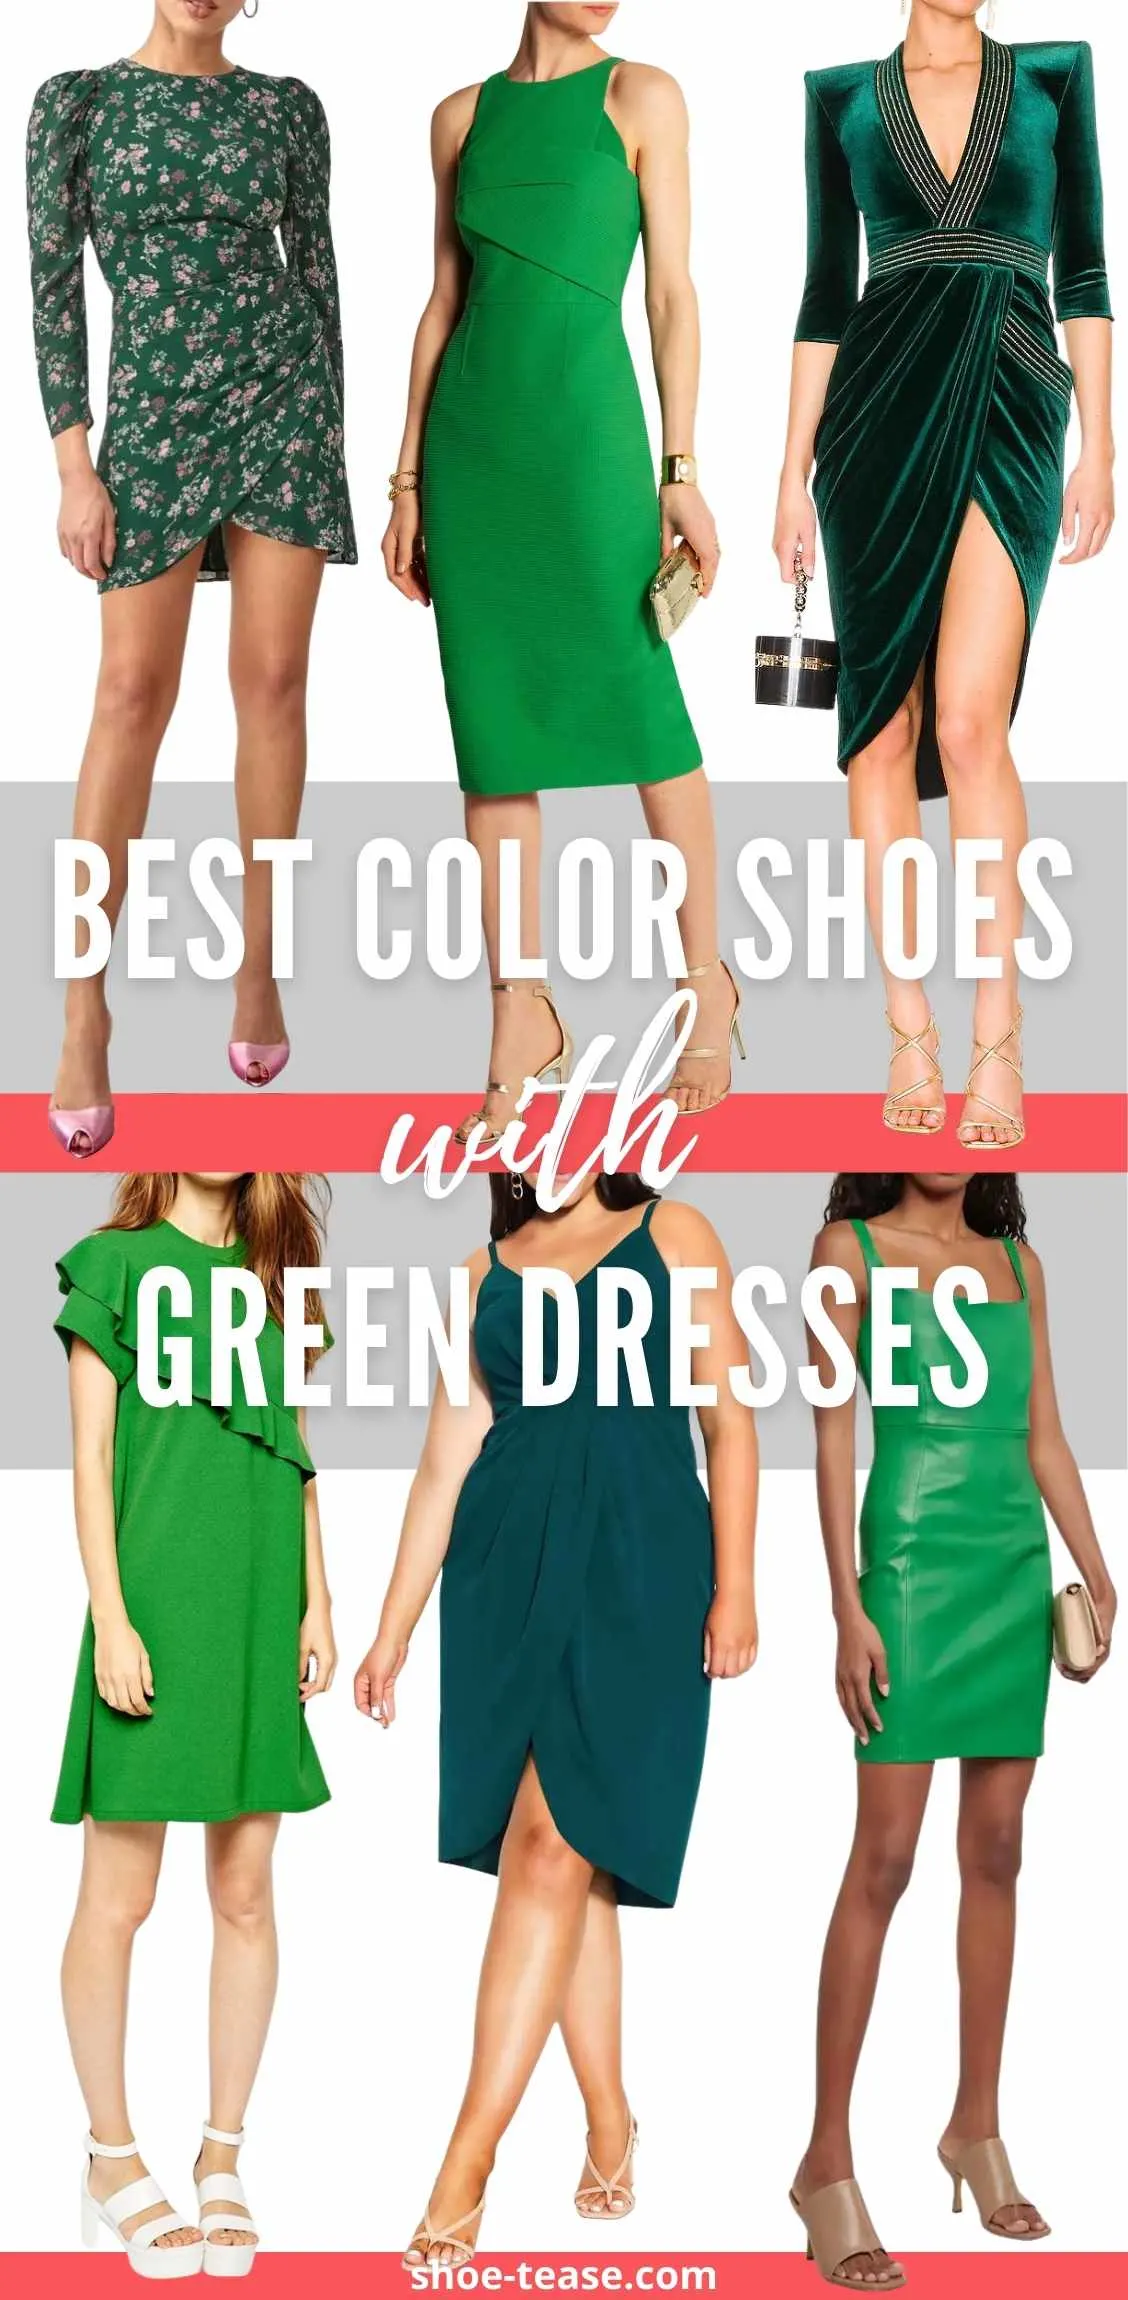 Hals eksil sensor Go Green! 10 Best Color Shoes to Wear with Green Dresses & Emerald Outfits